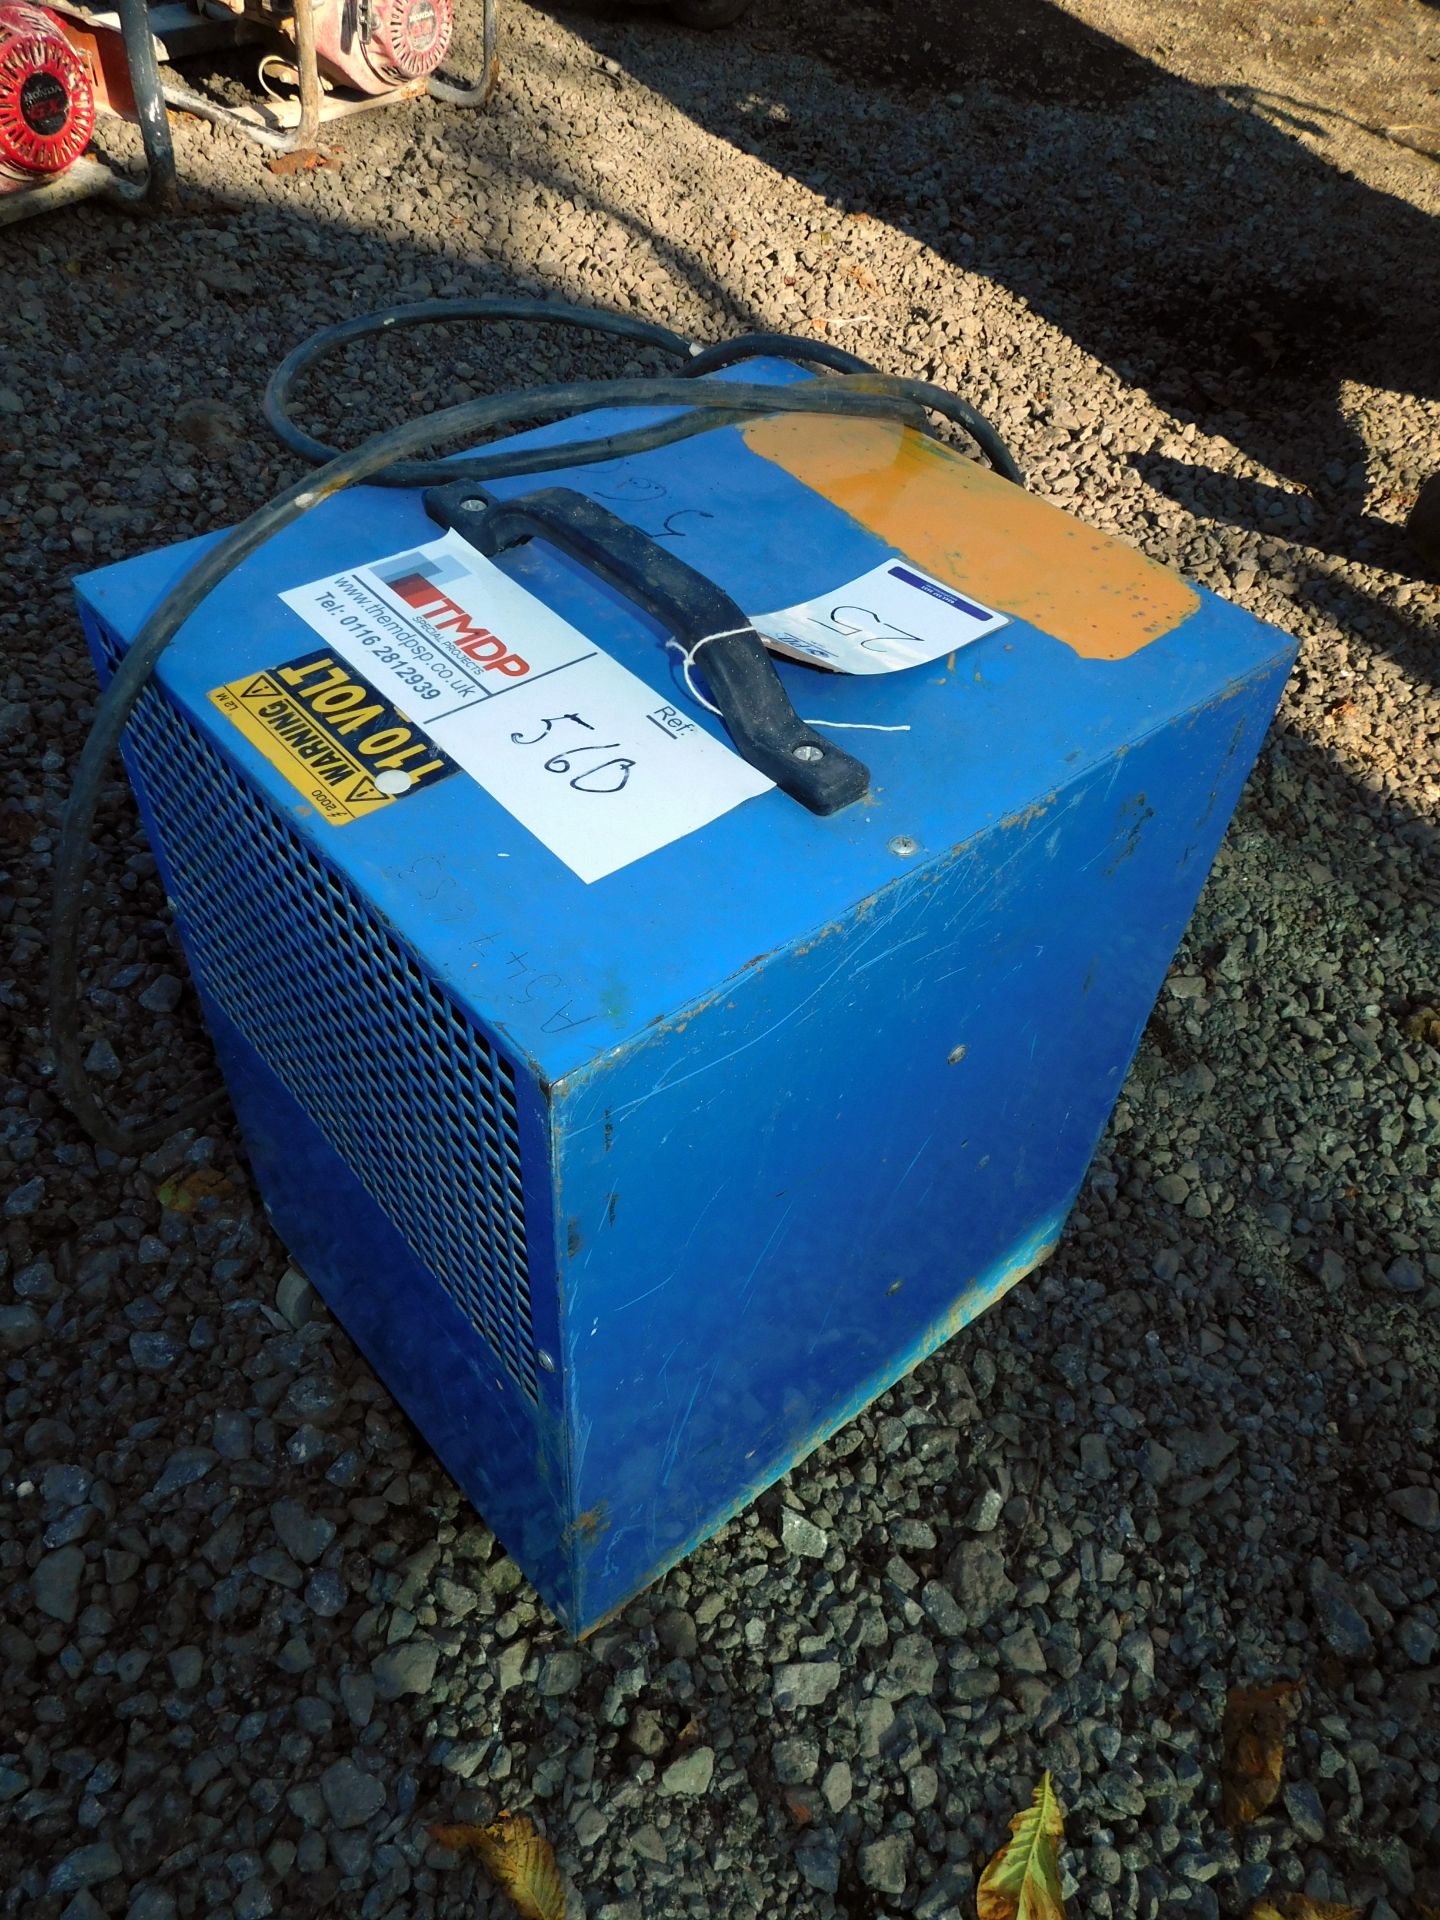 CR30DV Dehumidifier (Located Milton Keynes, Viewing by Appointment – see General Notes)